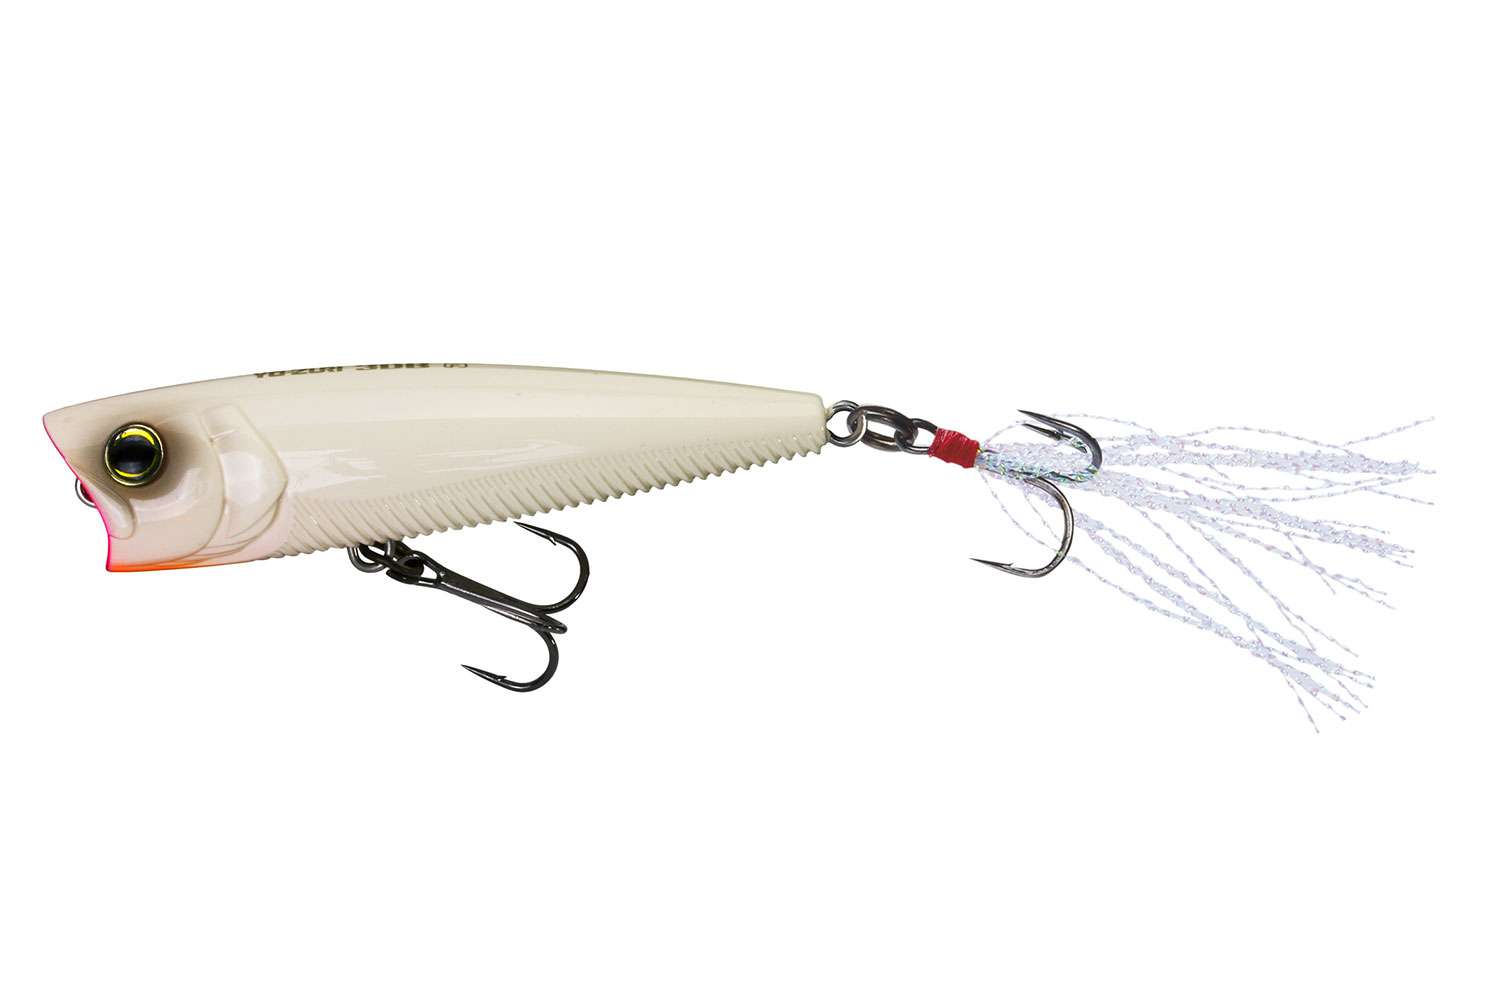 2. A good bet when fish are holding around cover like wood, bushes and laydowns; Card says the Yo-Zuri 3DB Popper offers a best-of-both-worlds performance with solid walking ability complementing that enticing pop. Favoring this bait anytime from the spawn through early summer, Card knows the value of a bait that can toggle between presentation styles.</p>

<p>âI can do both on one cast,â he said. âIf Iâm walking my popper and I have a fish short strike it, right then and there, I can change the cadence from walking to popping and get that fish to come back and take the bait. Itâs kinda cool because I can impart both actions very easily.â</p>

<p>Castability is key, especially when reaching a popper into tight spaces. To this point, Card lauds the 3DB Popperâs aerodynamic form for facilitating targeted casts.</p>